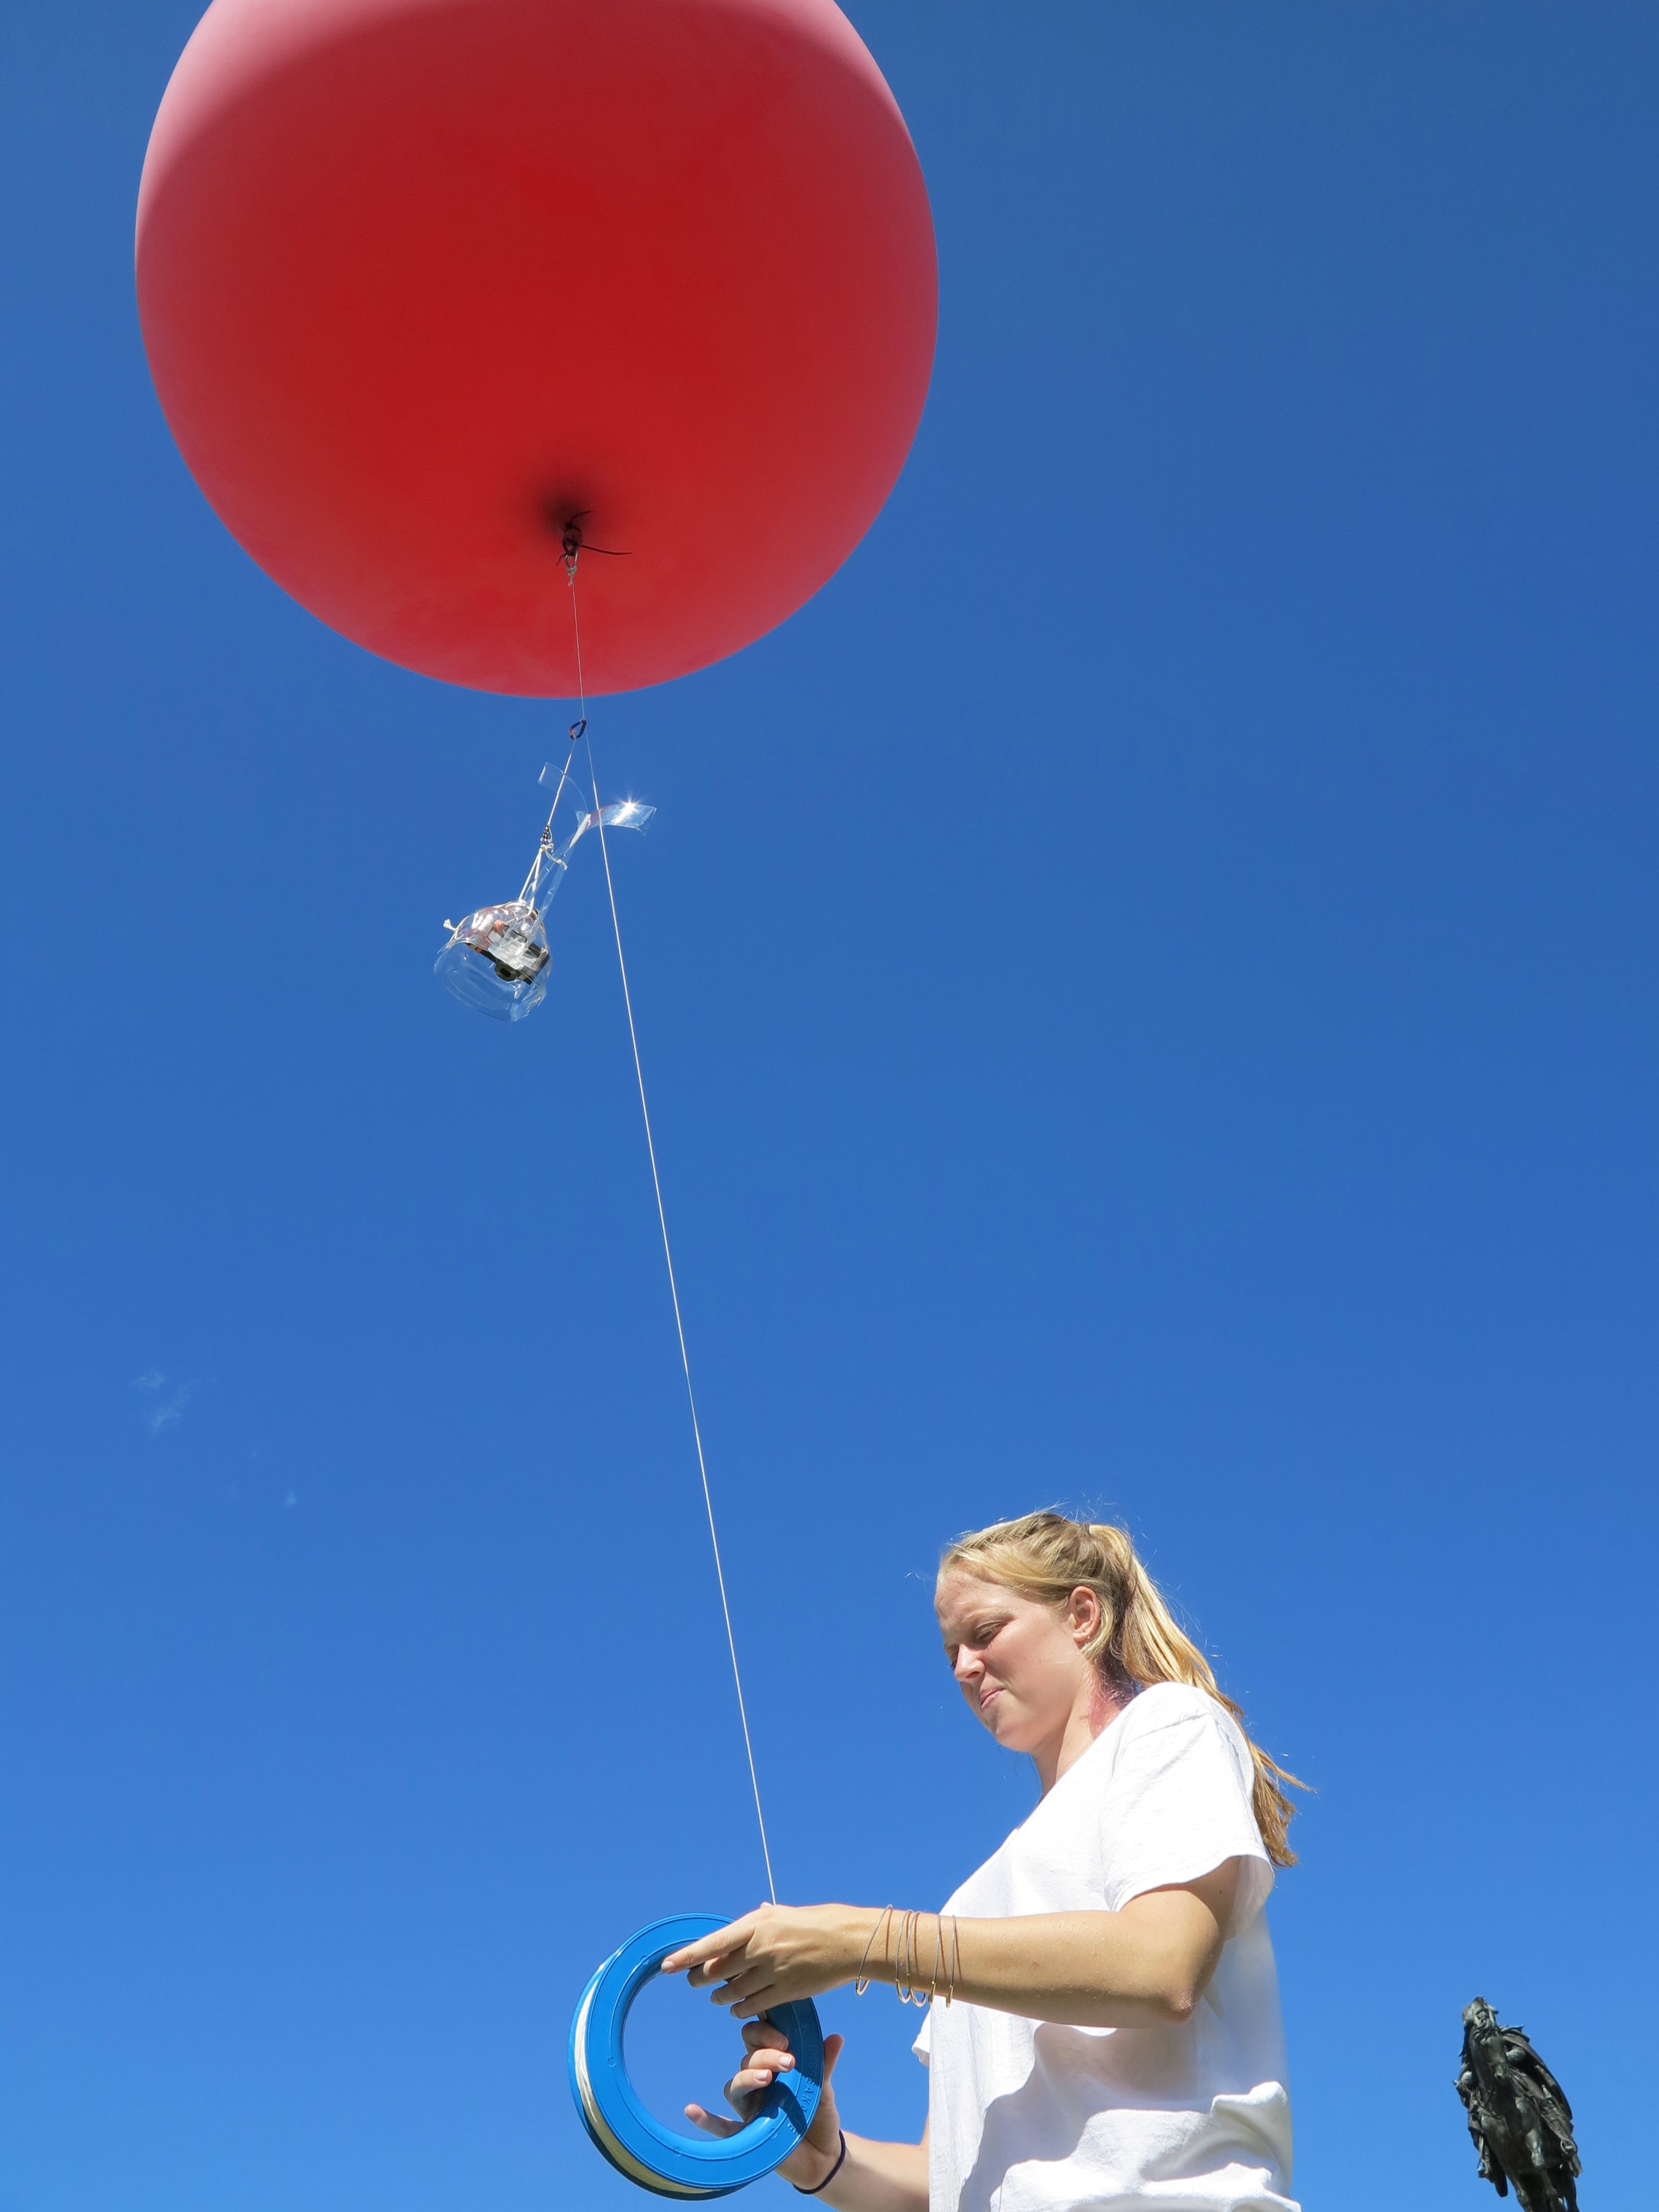 Megan Brock, a Swarthmore student, assists in sending the balloon up for another flight.